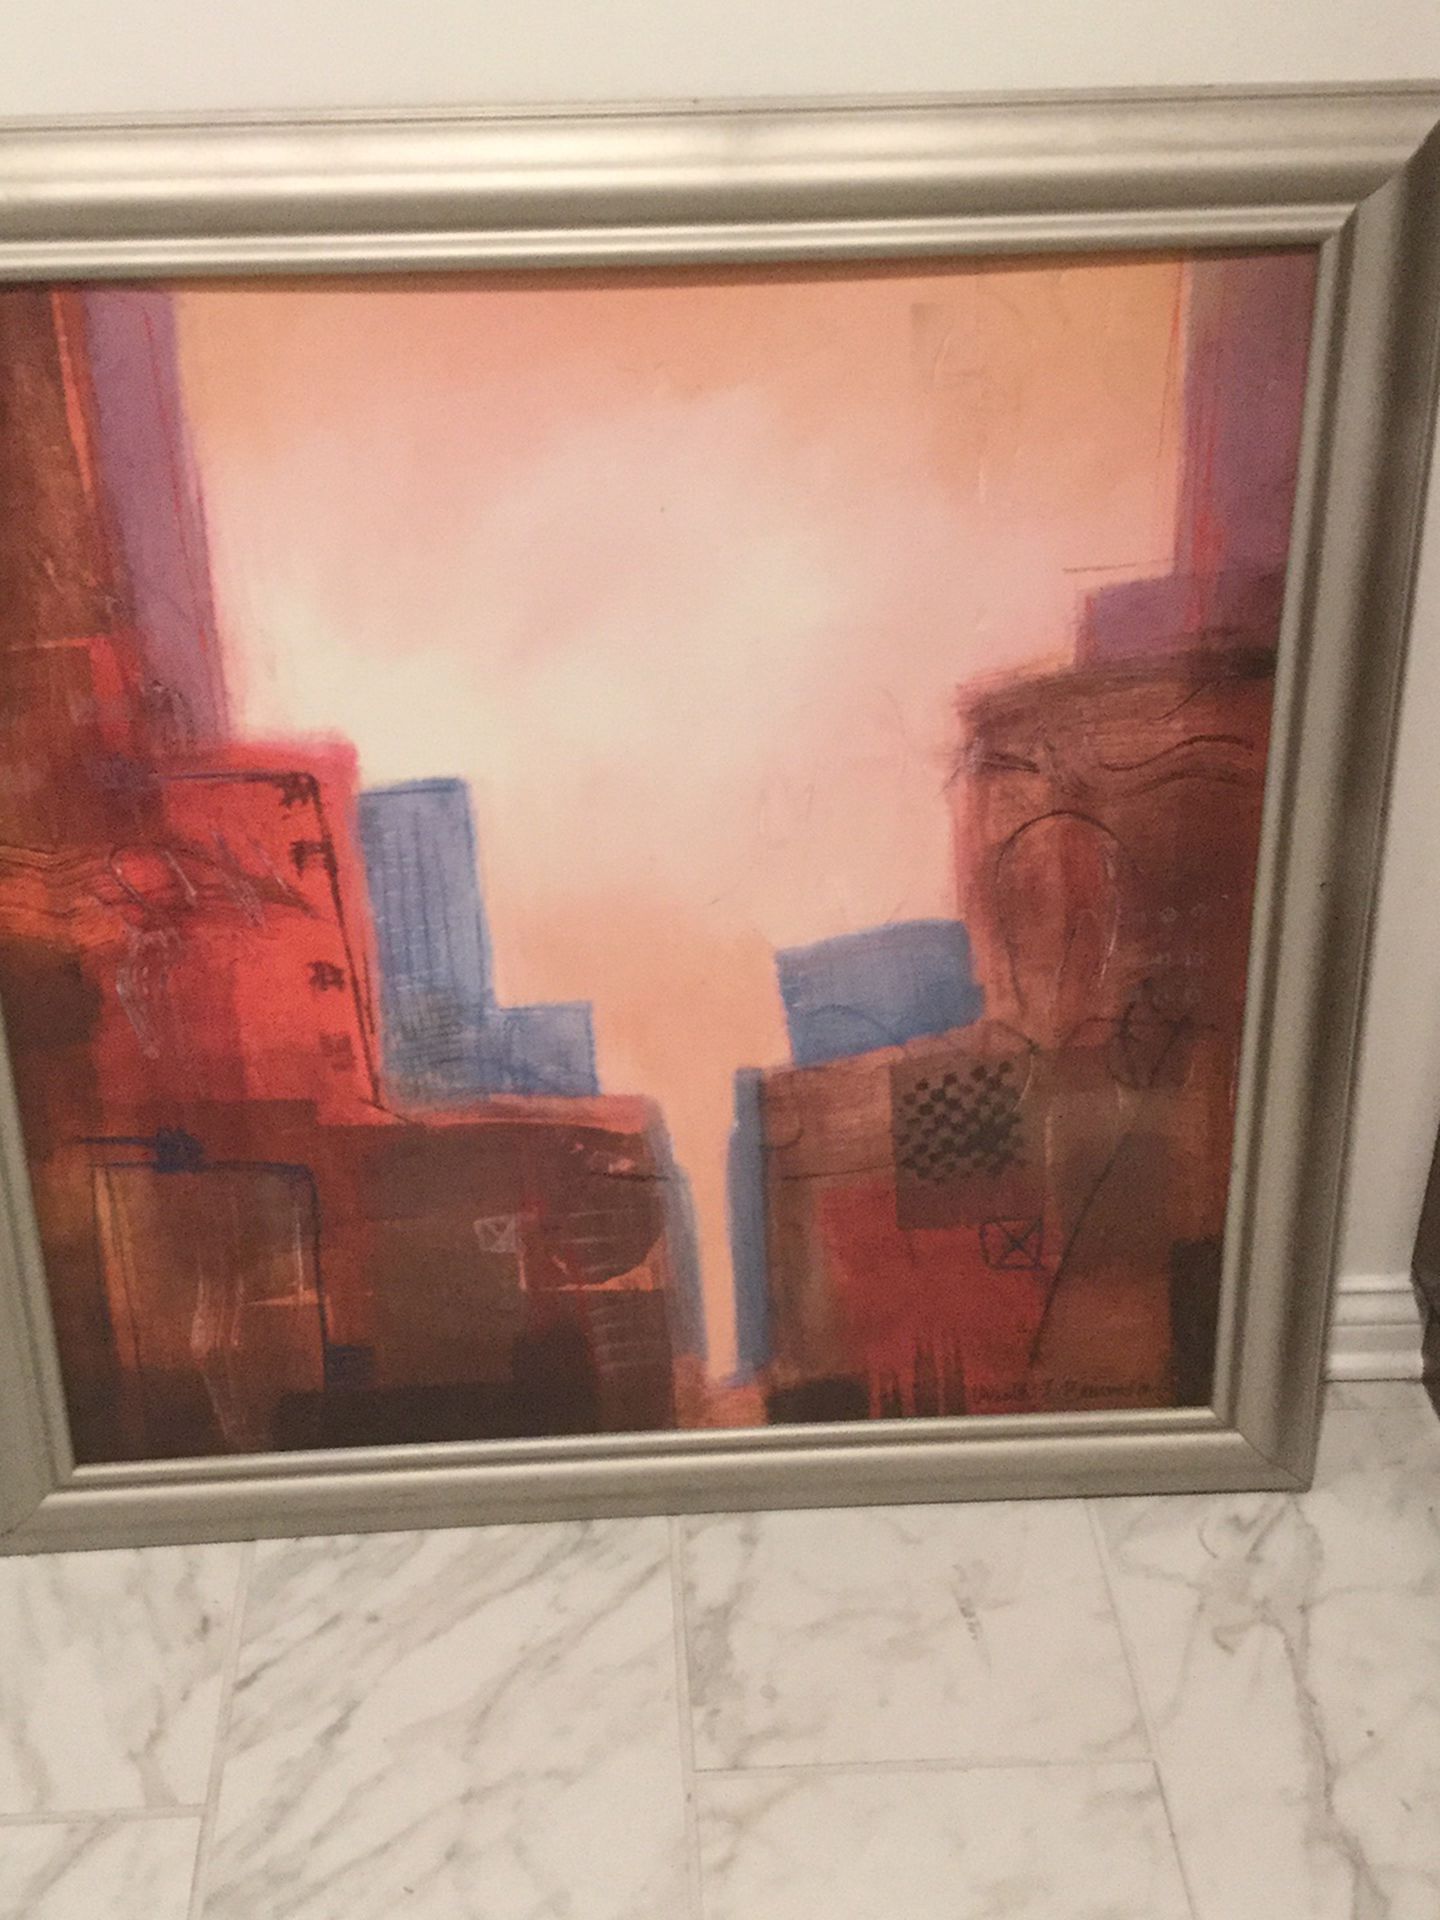 CONTEMPORARY FRAMED PAINTING. CITYSCAPE. ARTIST SIGNED- URSULA J. BRENNER. SILVER PAINTED FRAME. WEAR MARKS ON FRAME (see picture). 38” x 38”.